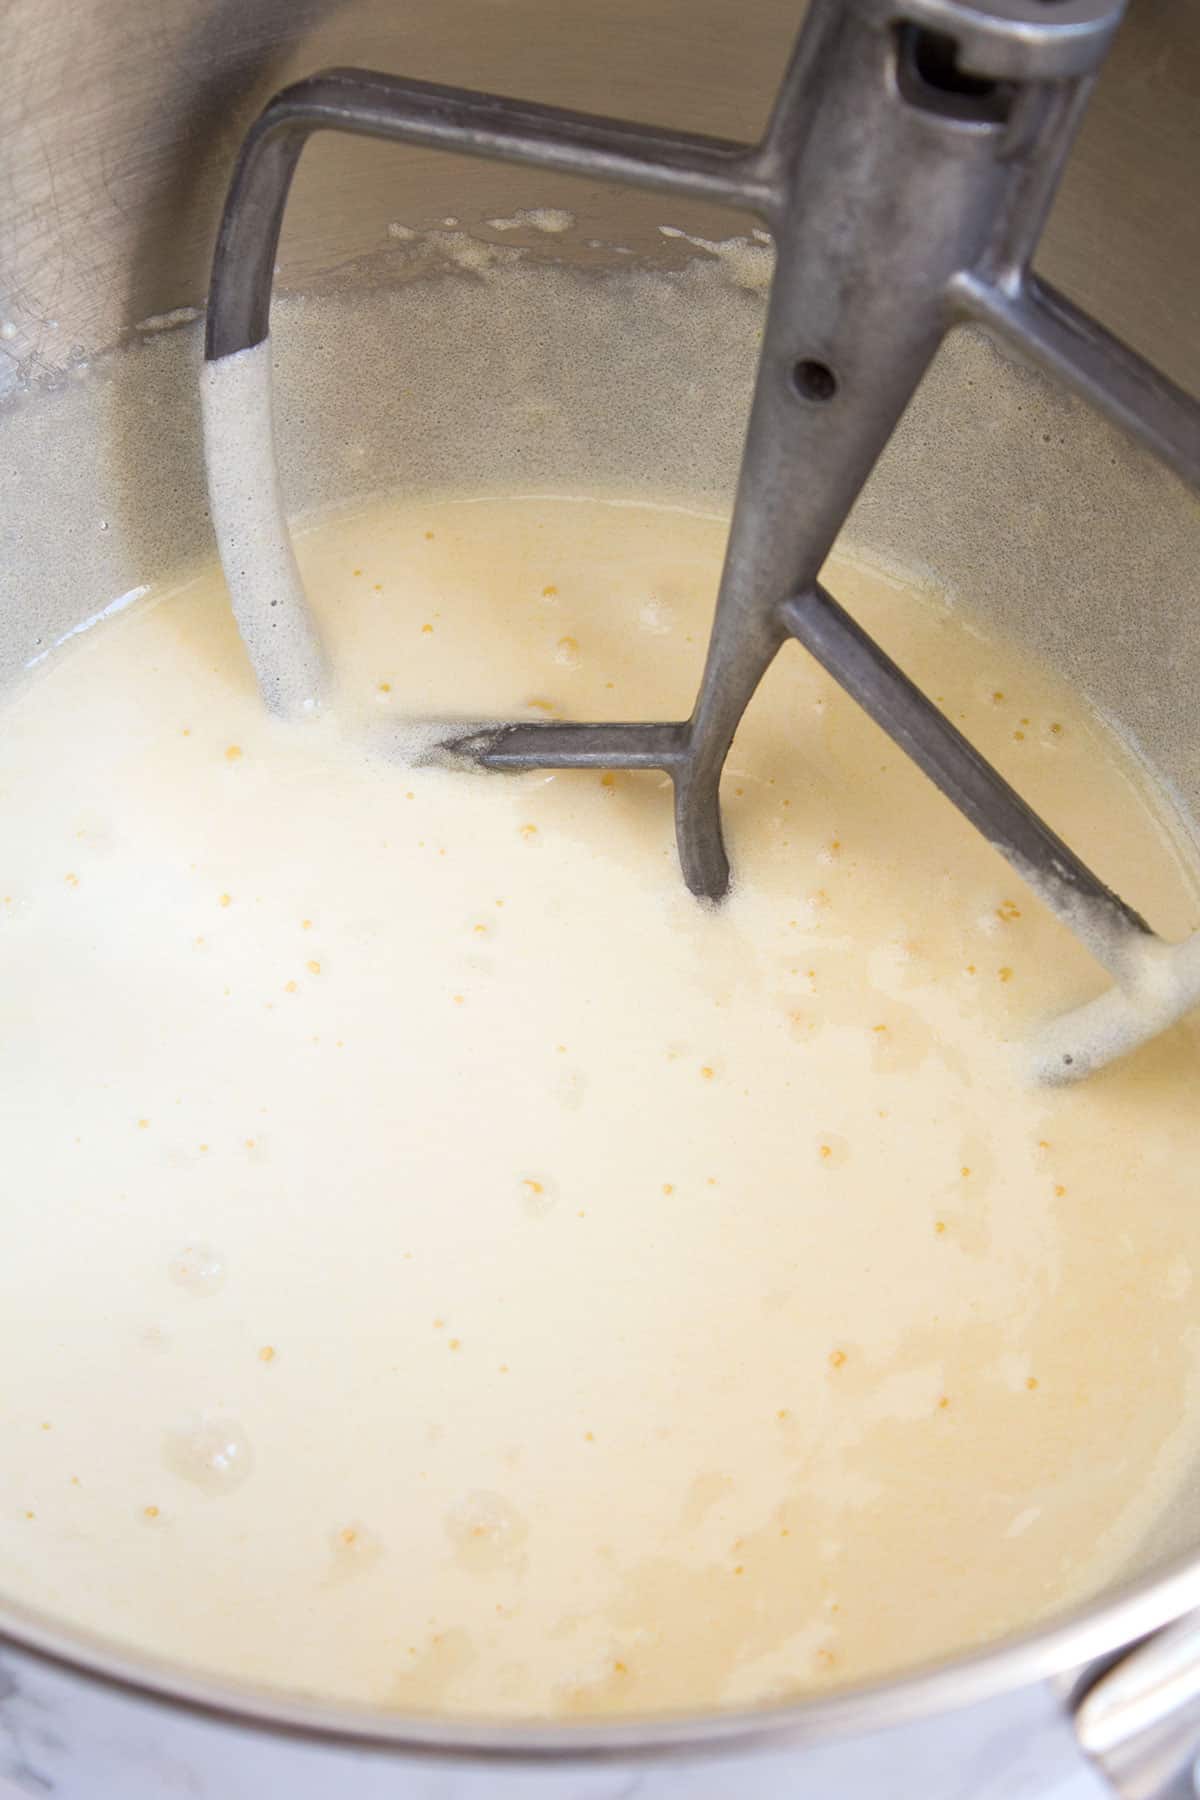 Yellow cake batter in a mixing bowl with a silver paddle attachment sitting in the bowl.